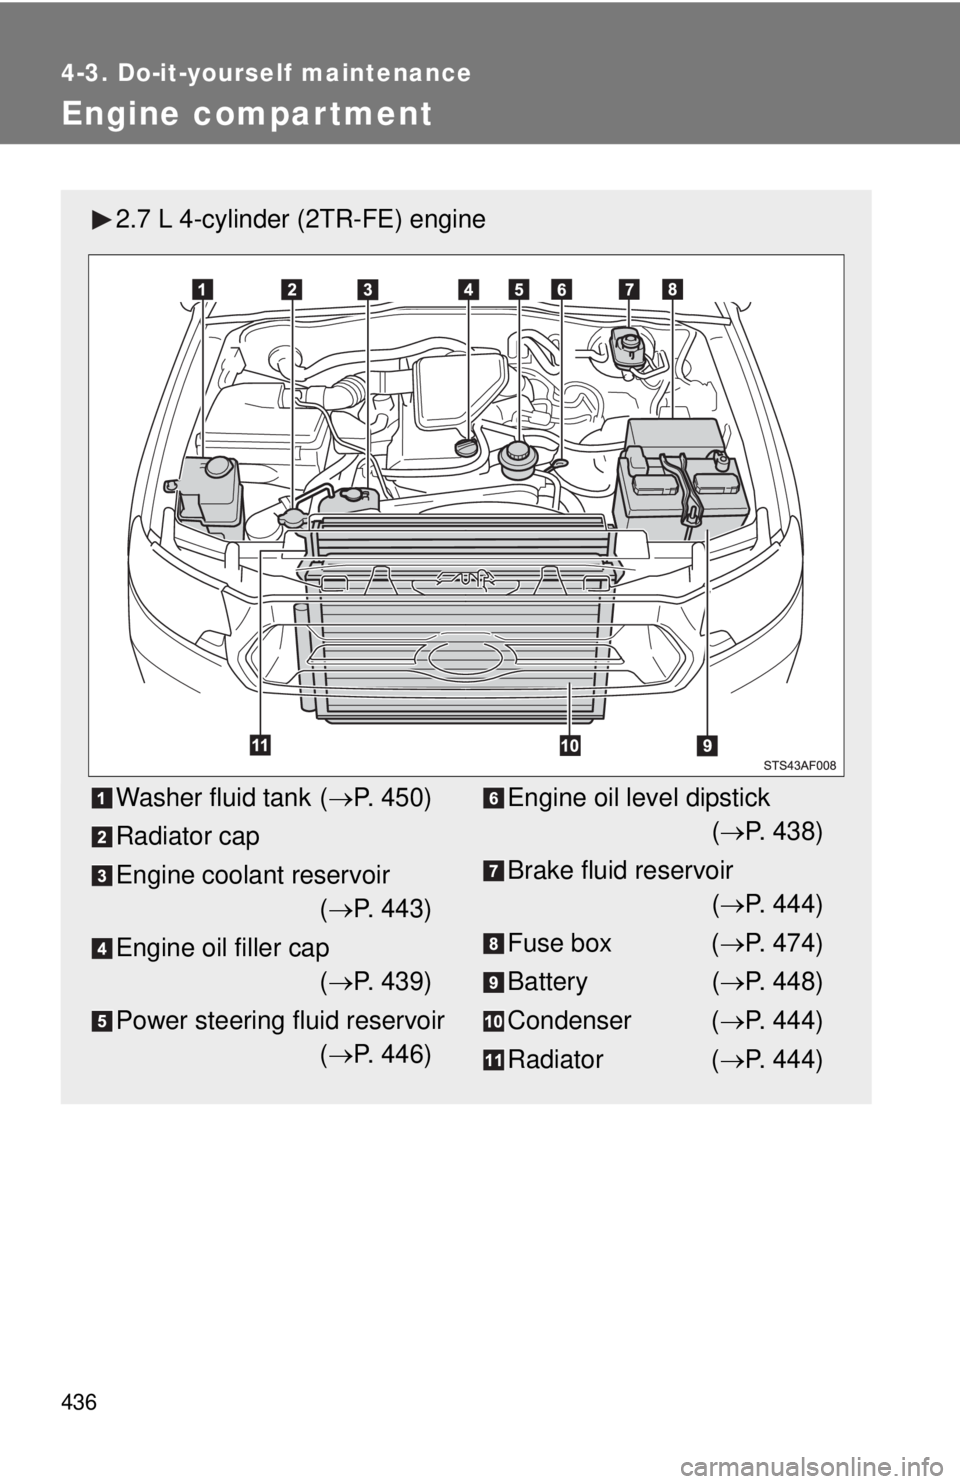 TOYOTA TACOMA 2012  Owners Manual (in English) 436
4-3. Do-it-yourself maintenance
Engine compar tment
2.7 L 4-cylinder (2TR-FE) engine
Washer fluid tank (P. 450)
Radiator cap
Engine coolant reservoir ( P. 443)
Engine oil filler cap ( P. 